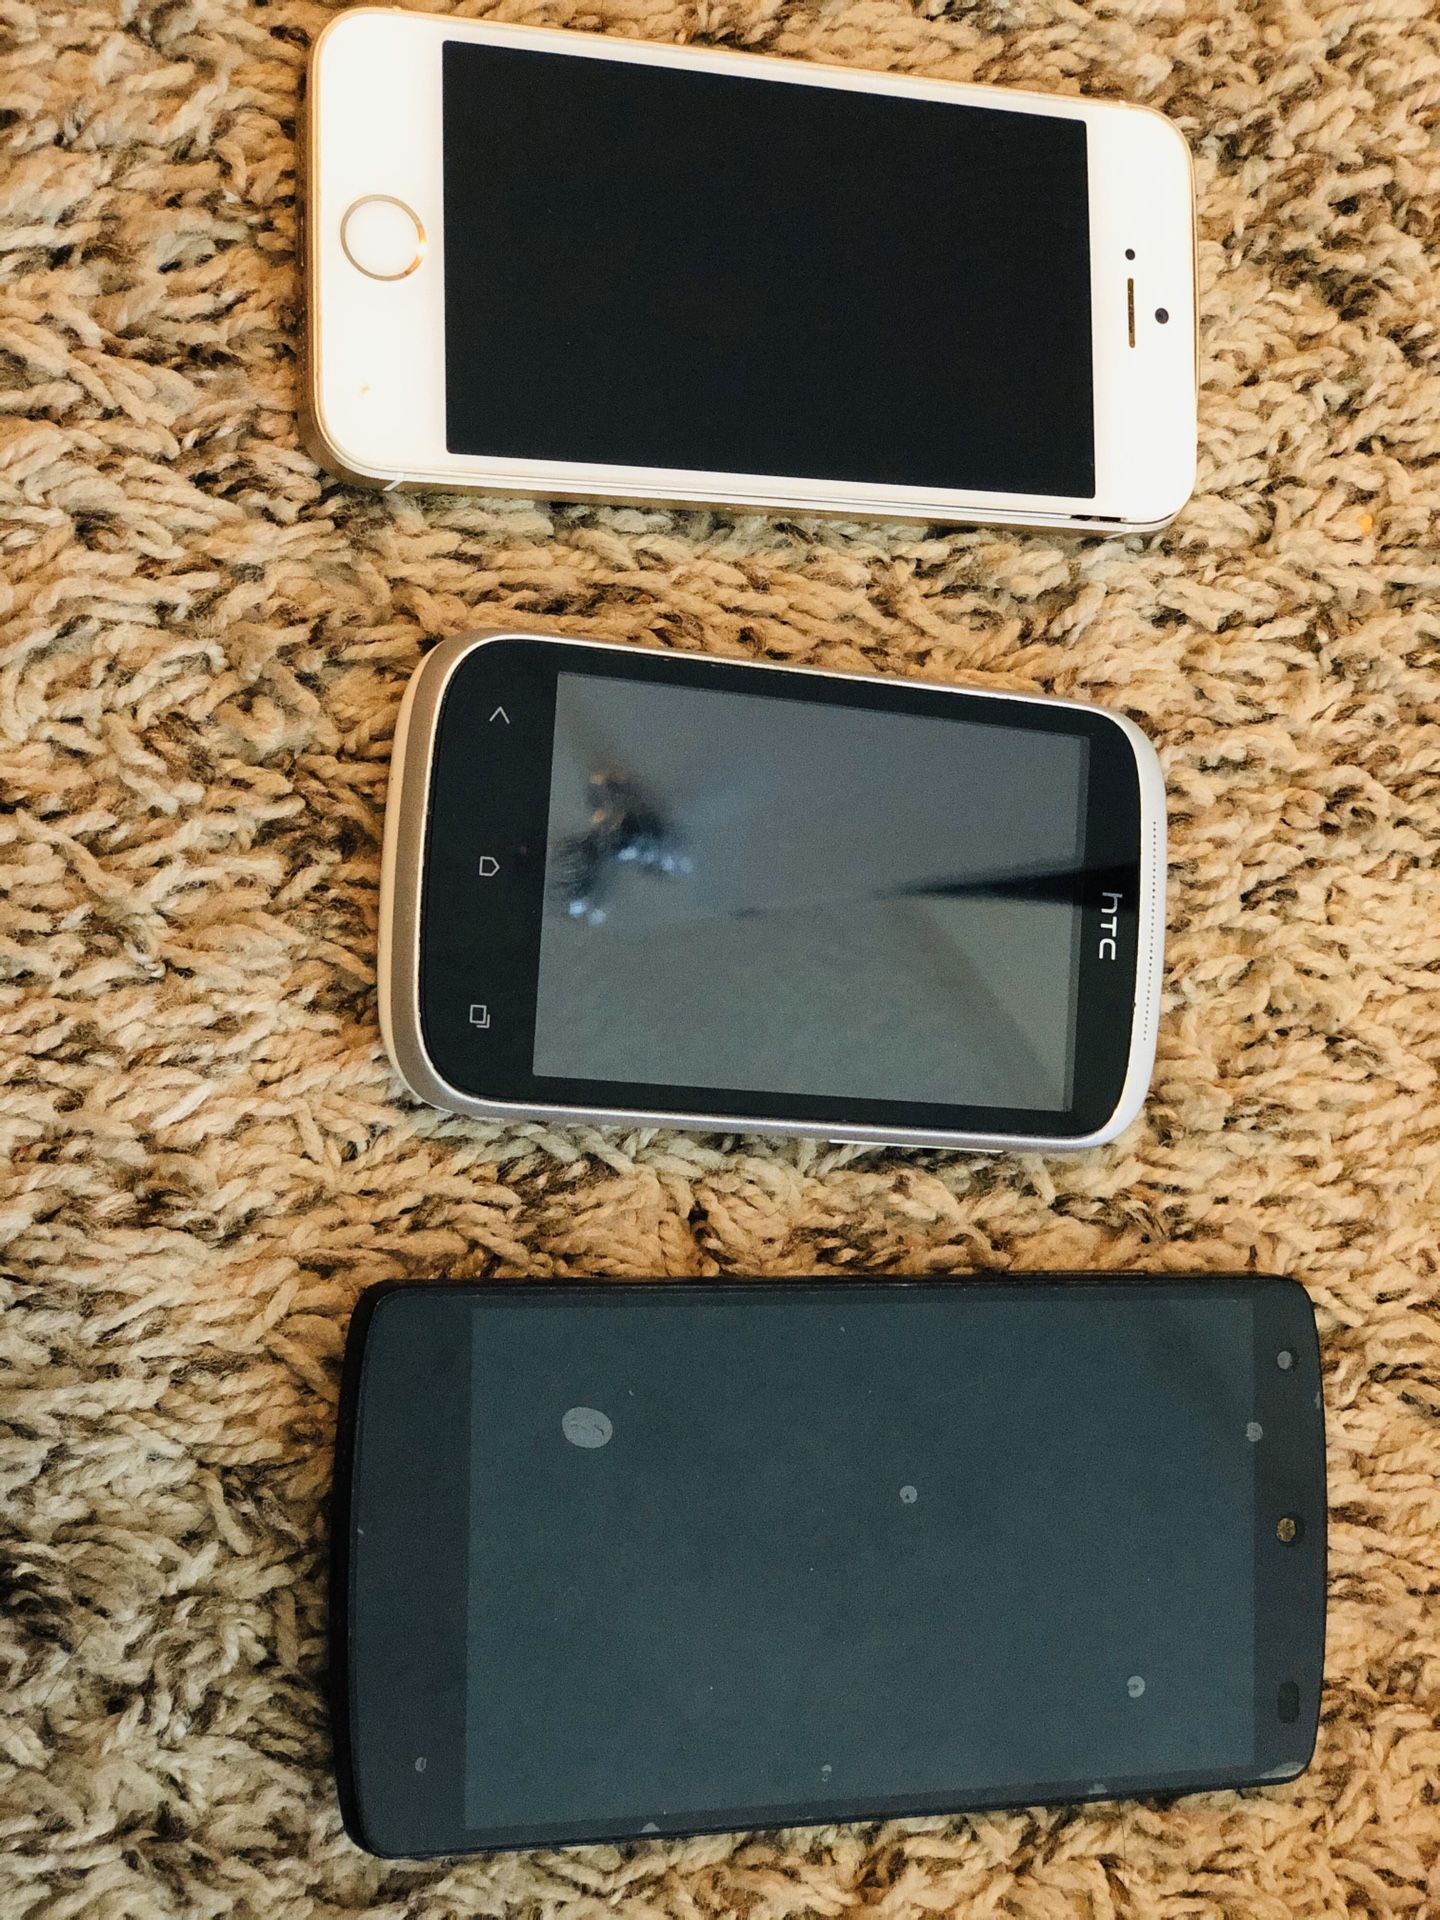 iPhone SE , nexus 5 and htc desire non working conditions for sale.